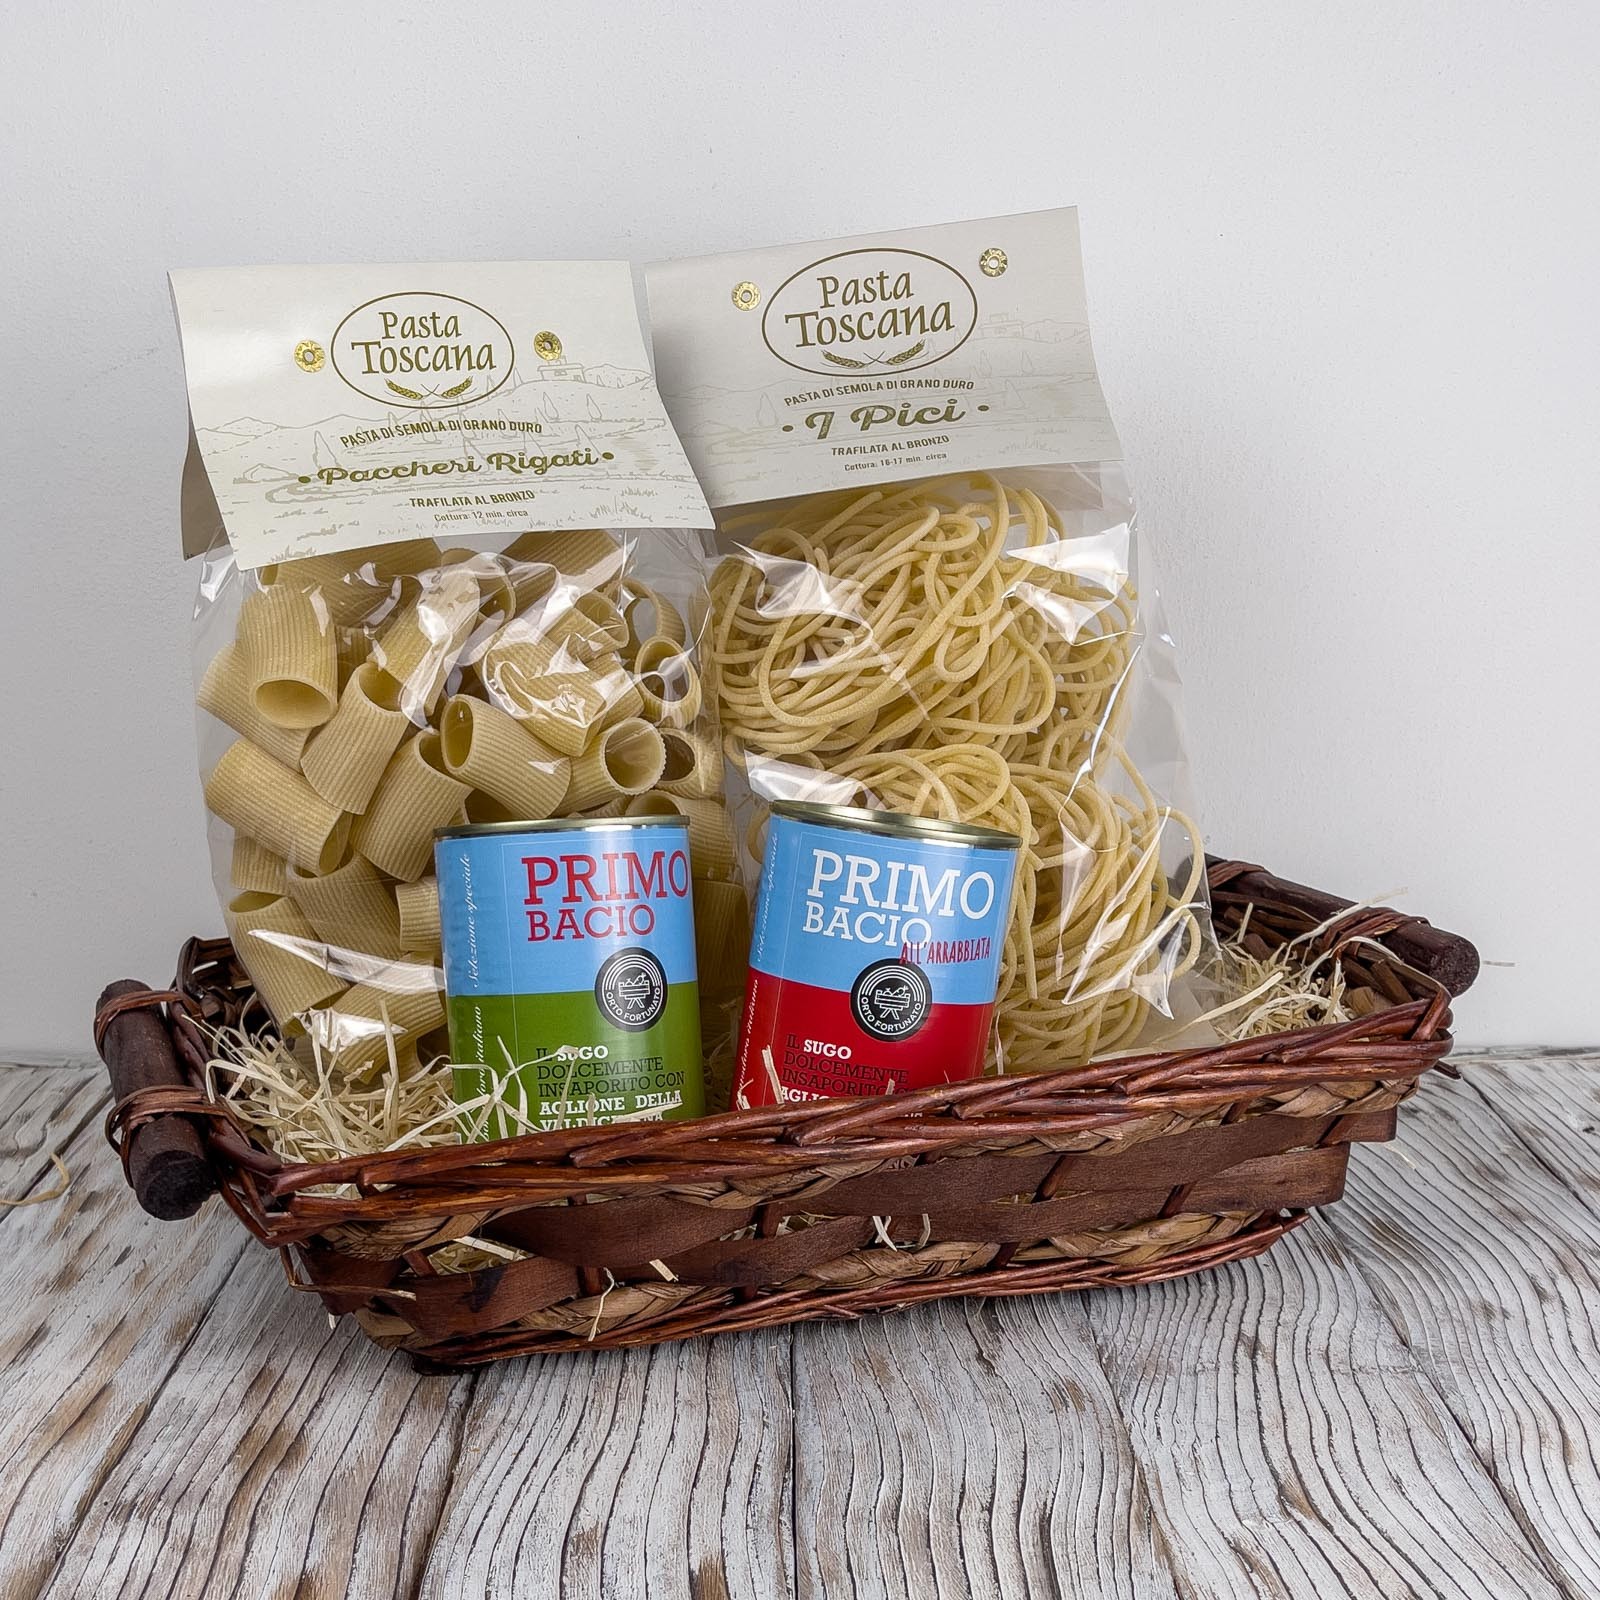 Gift Hamper consisting of a selection of 4 products for a total of about 2 kg. We will pack the basket and ship it wherever you want, there is also the possibility of adding a personalized card with a message.
For more information or product changes contact us in chat.